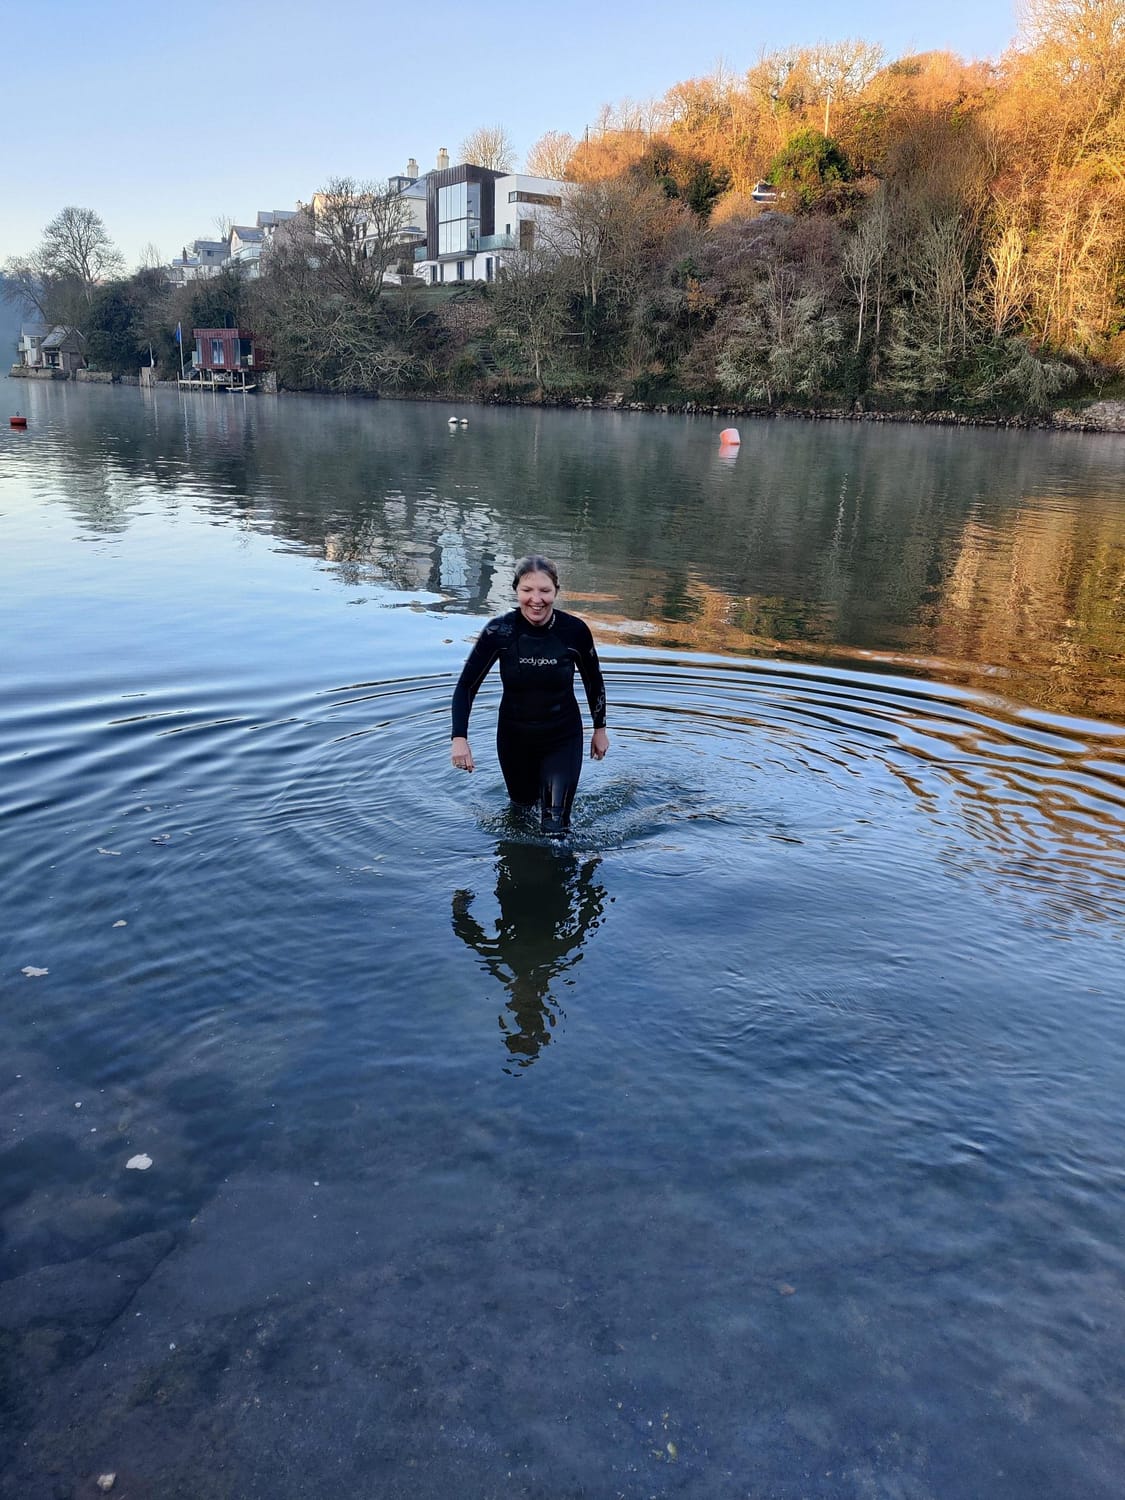 Wild Swimming at Anchor Cottage - Winter 2020 ready for a hot chocolate